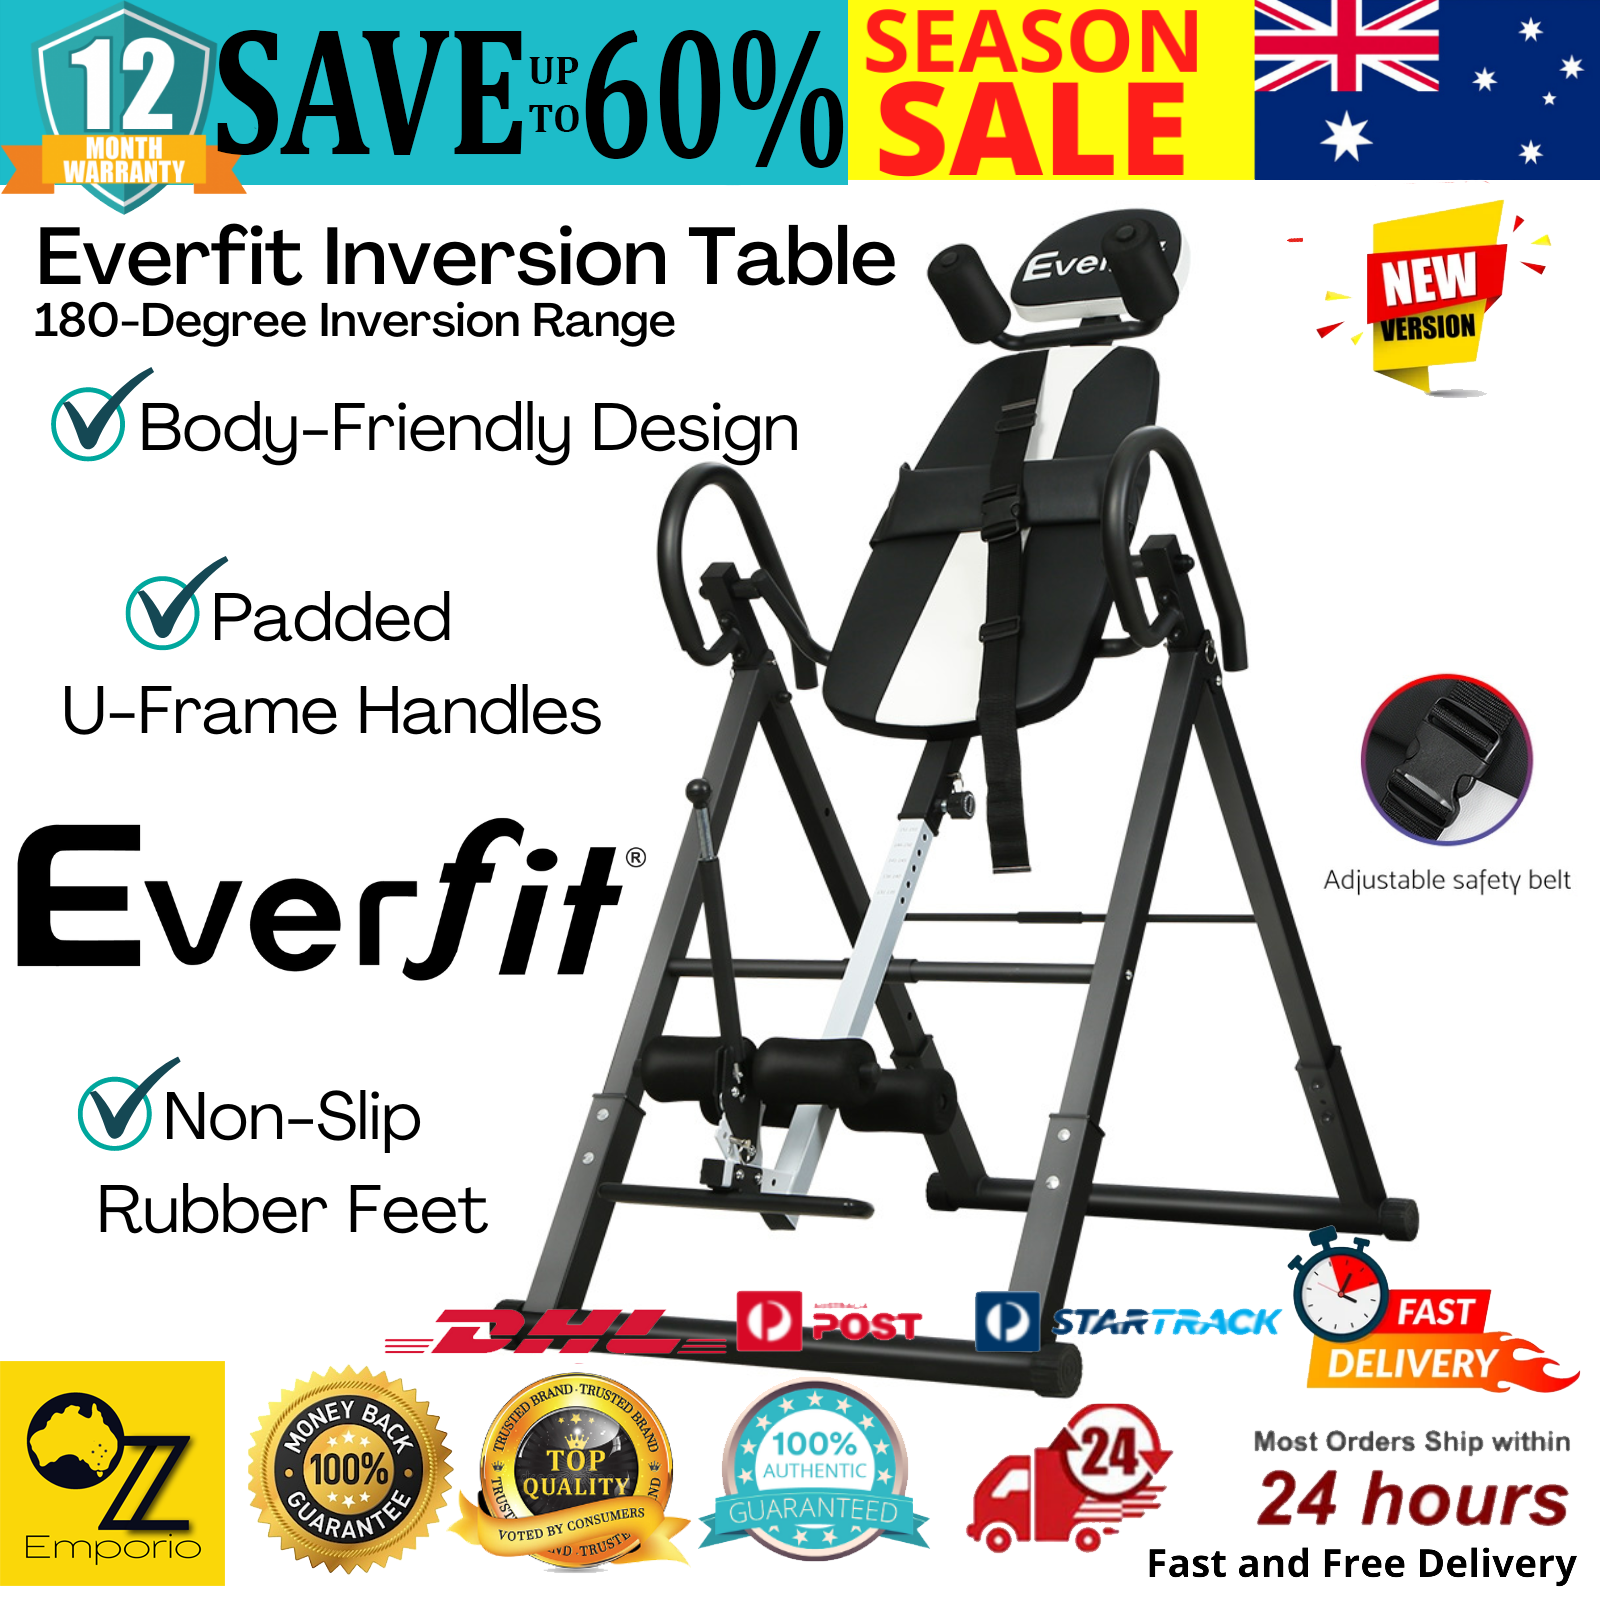 Everfit Inversion Table